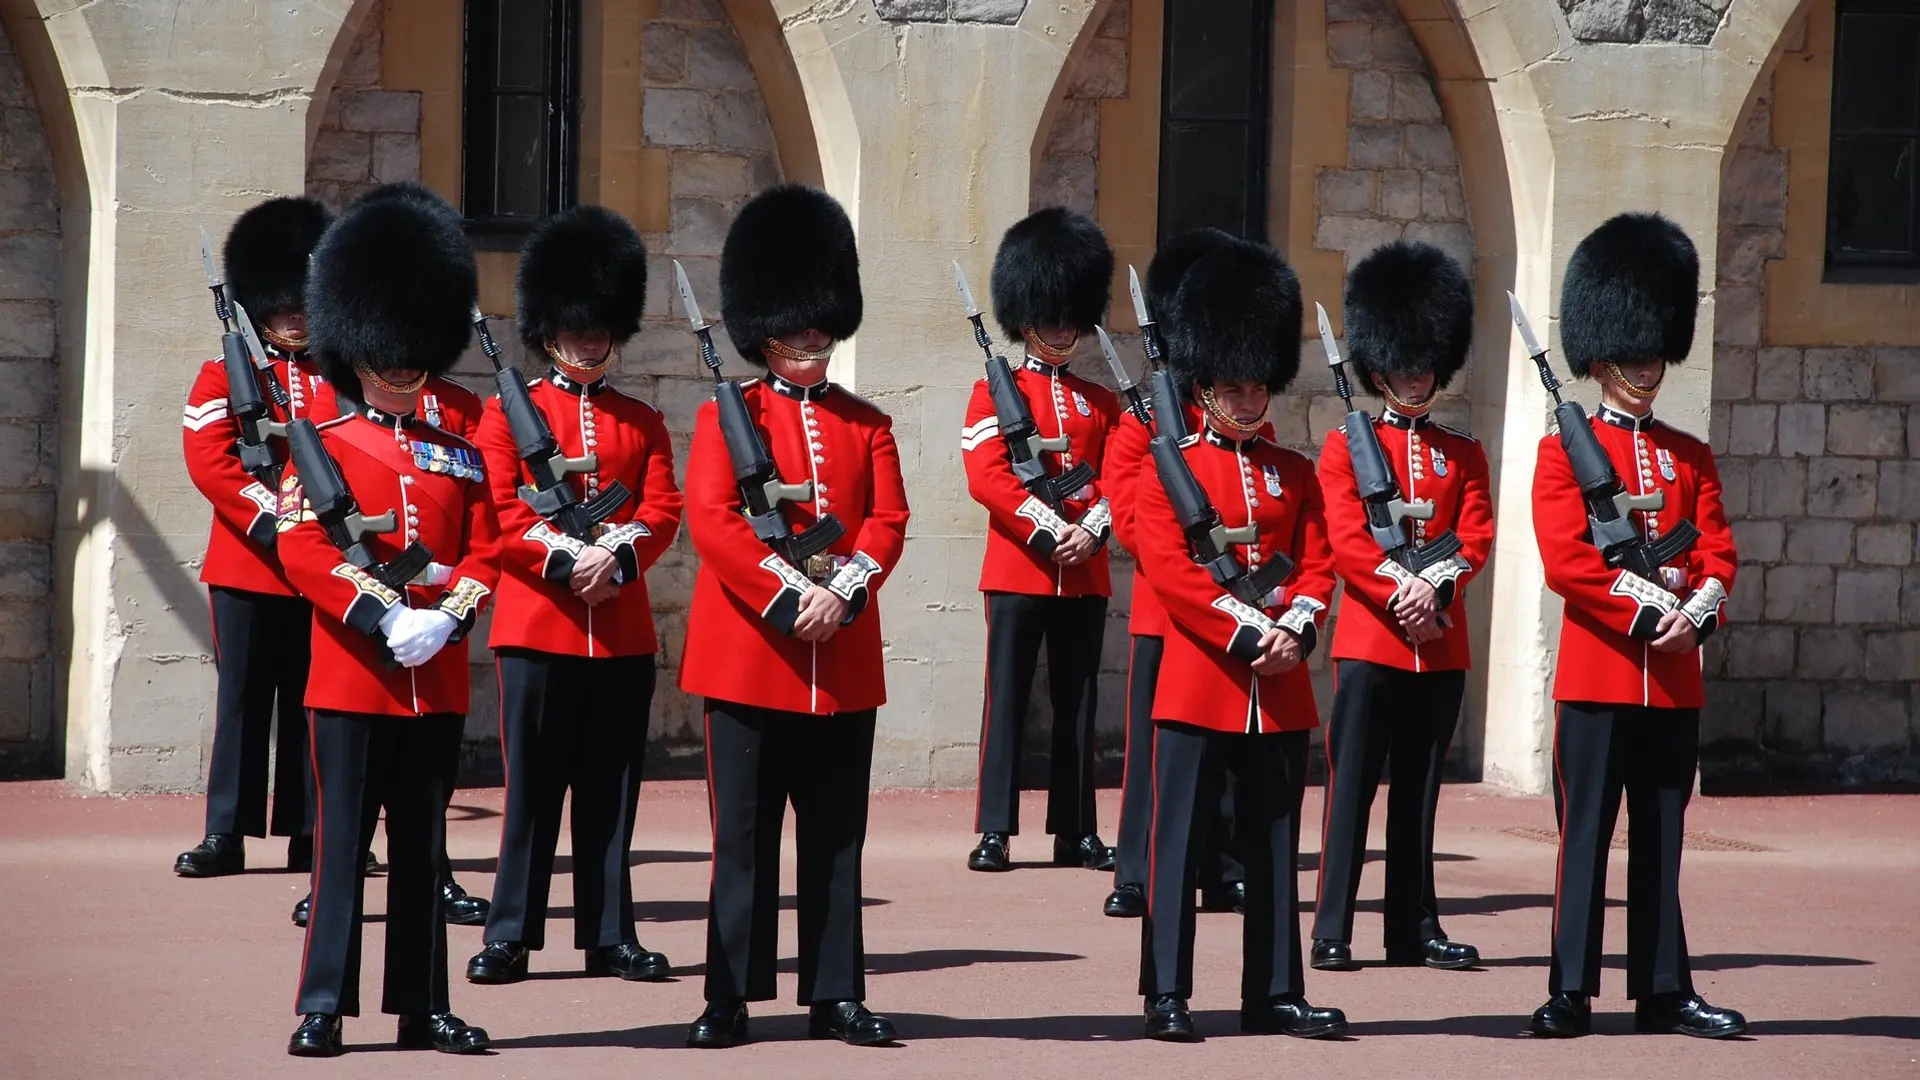 the queen's guard standing in front of Windsor castle